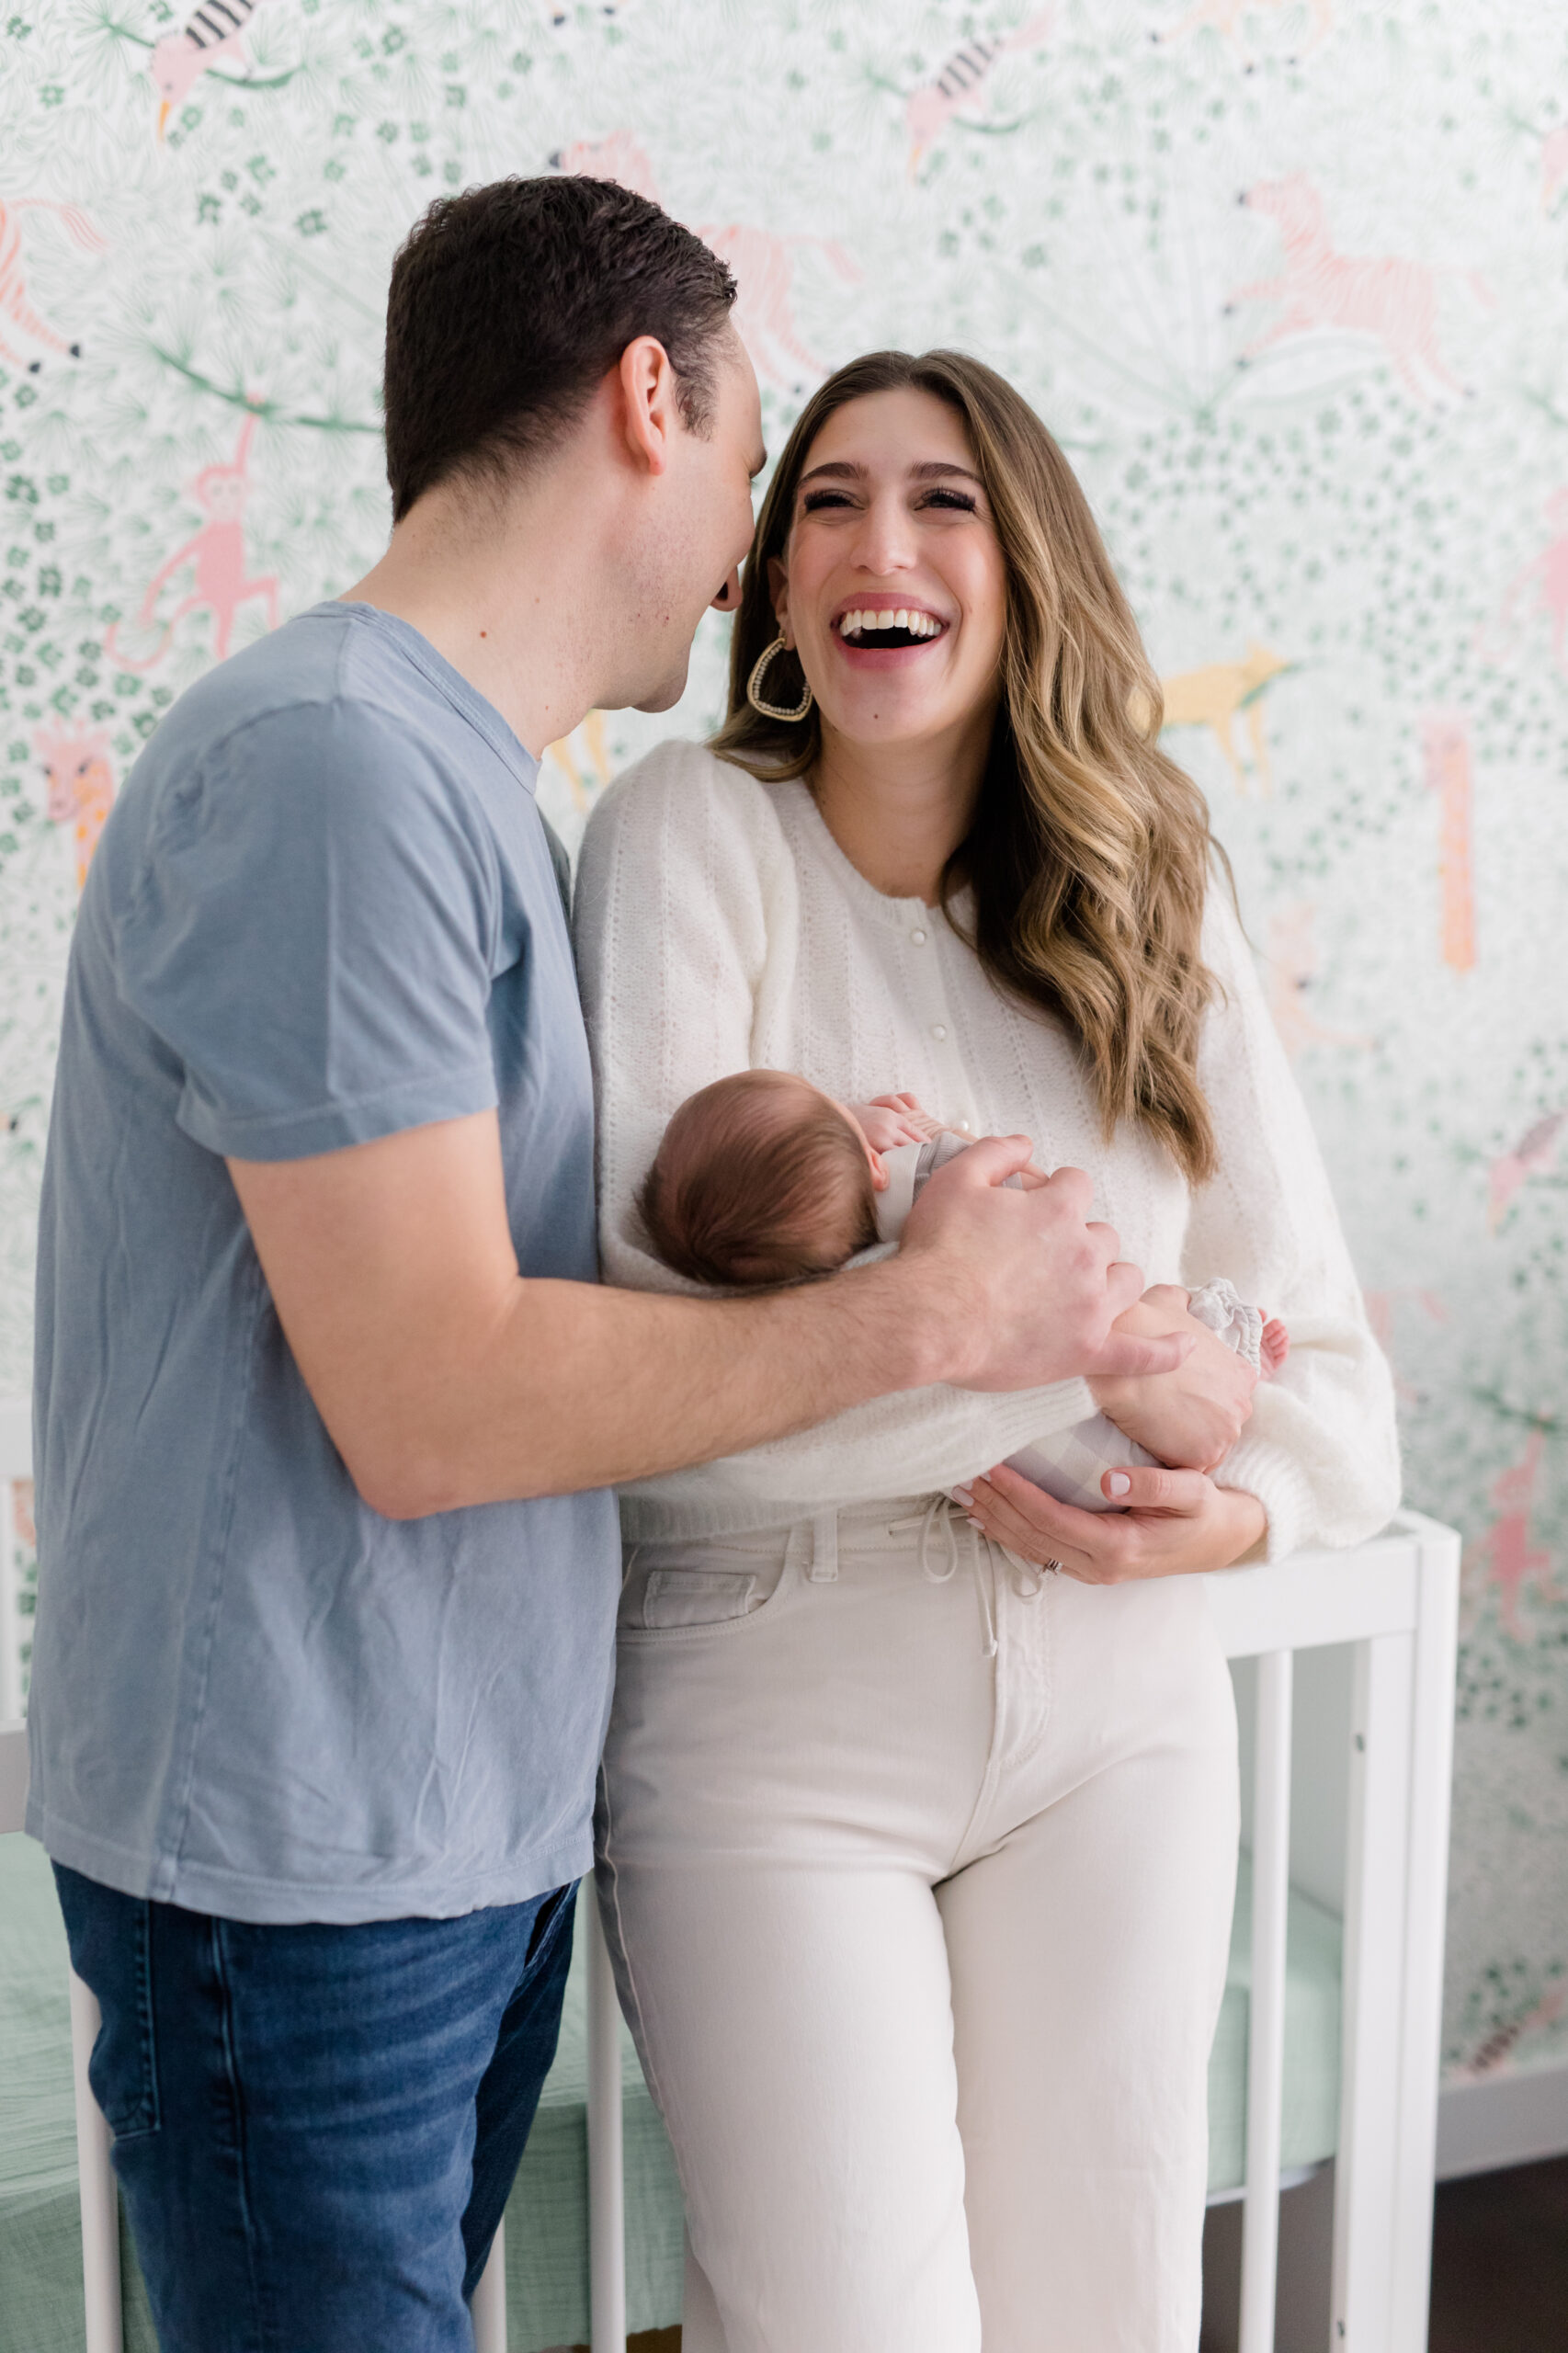 A mom and dad laugh while holding their baby at a newborn session with New York City newborn photographer Jacqueline Clair